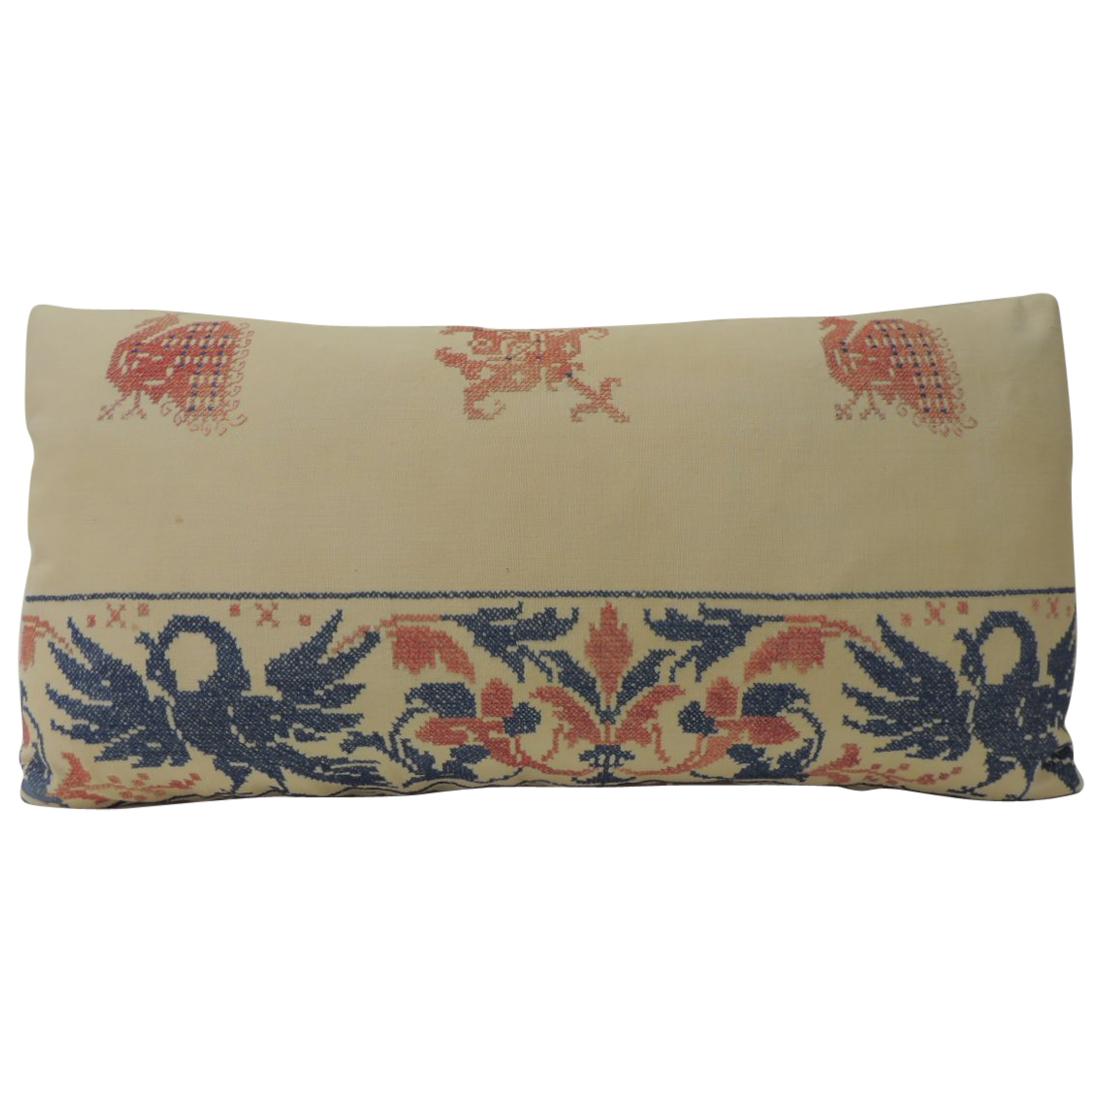 Greek Isle Red and Blue Embroidery Antique Decorative Pillow